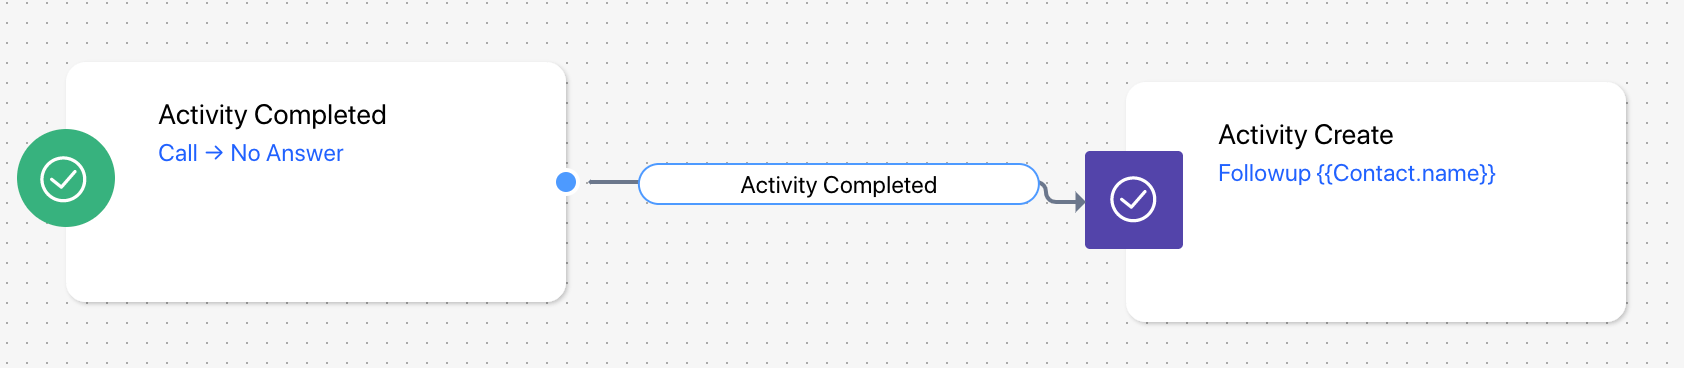 activity_completed_u.png